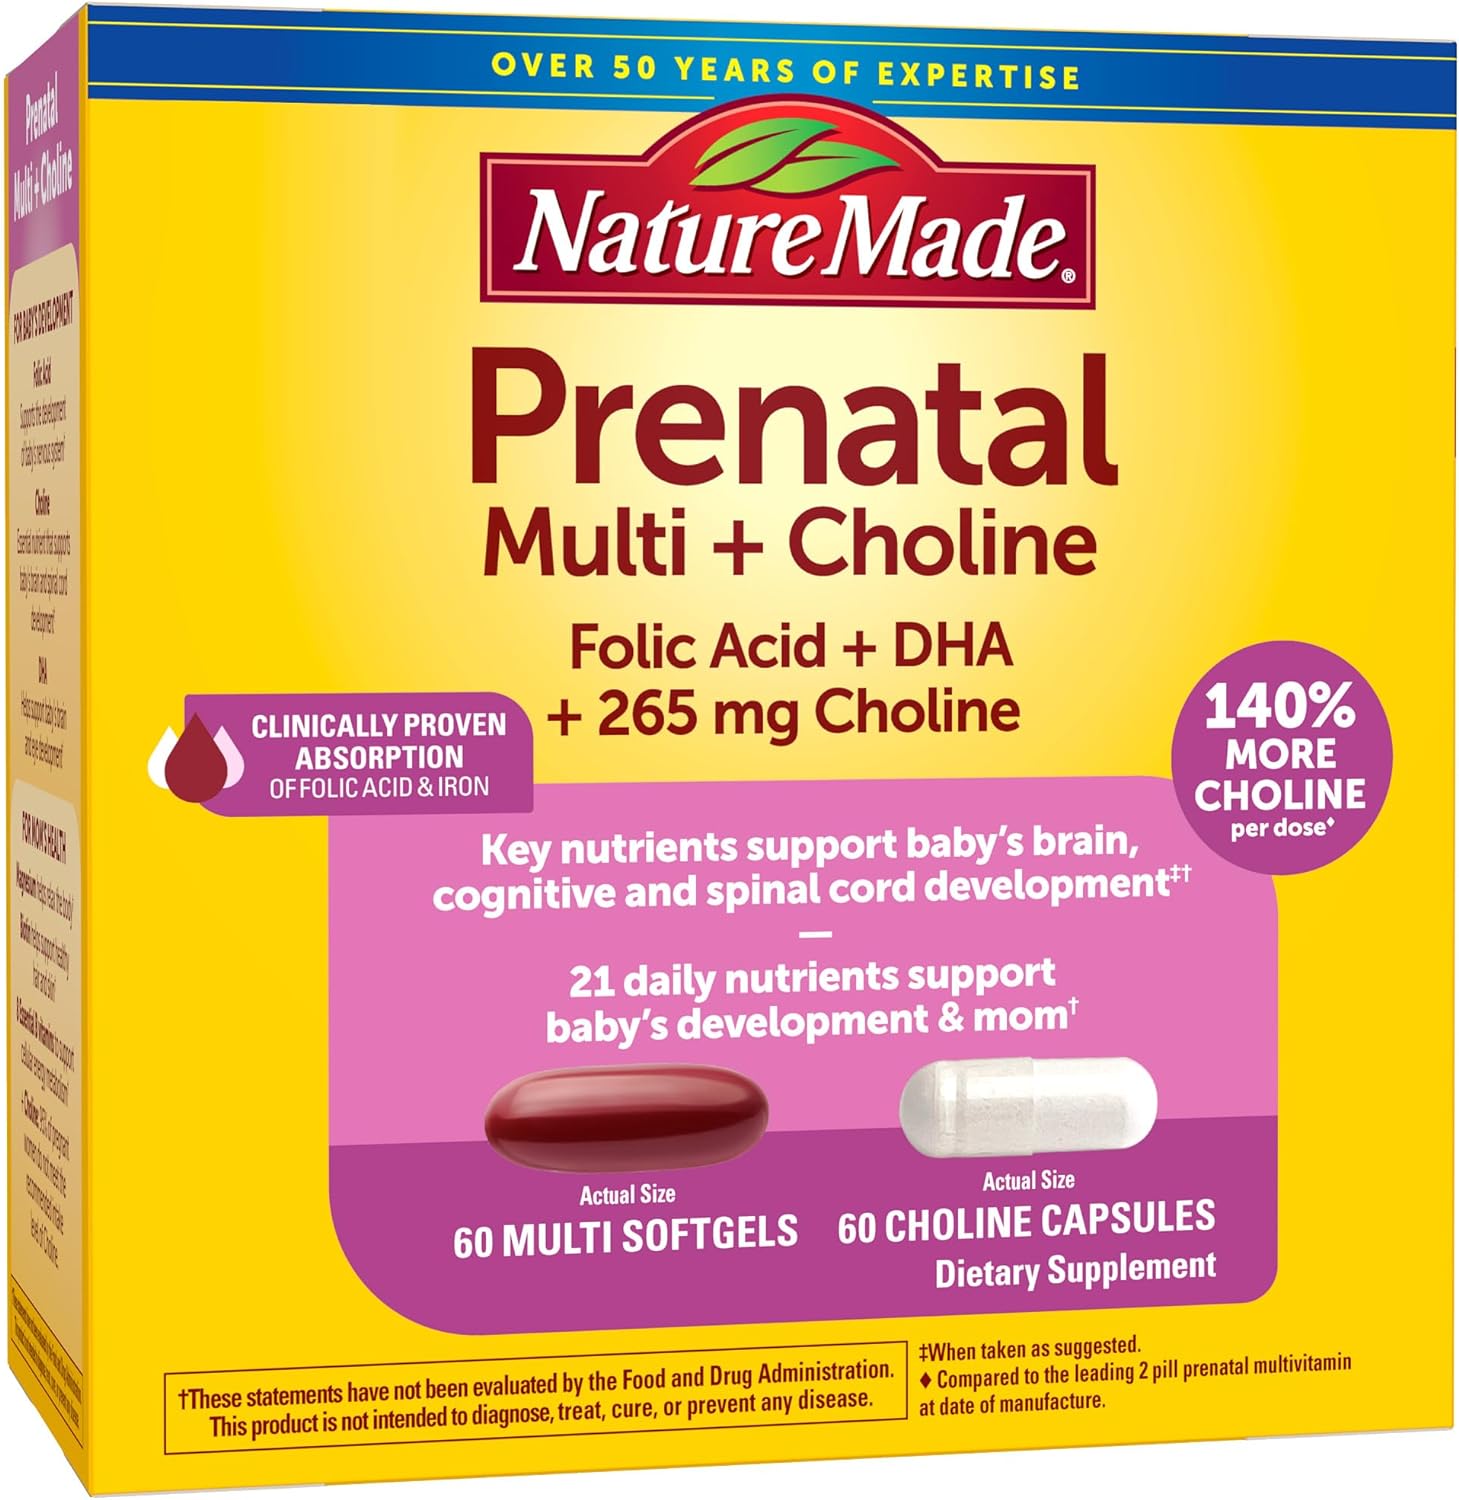 Nature Made Prenatal Vitamin Softgels + Choline Capsules, Folic Acid + DHA + Choline, 60 Prenatal Vitamins for Women, 60 Choline Supplements Capsules, 60 Day Supply